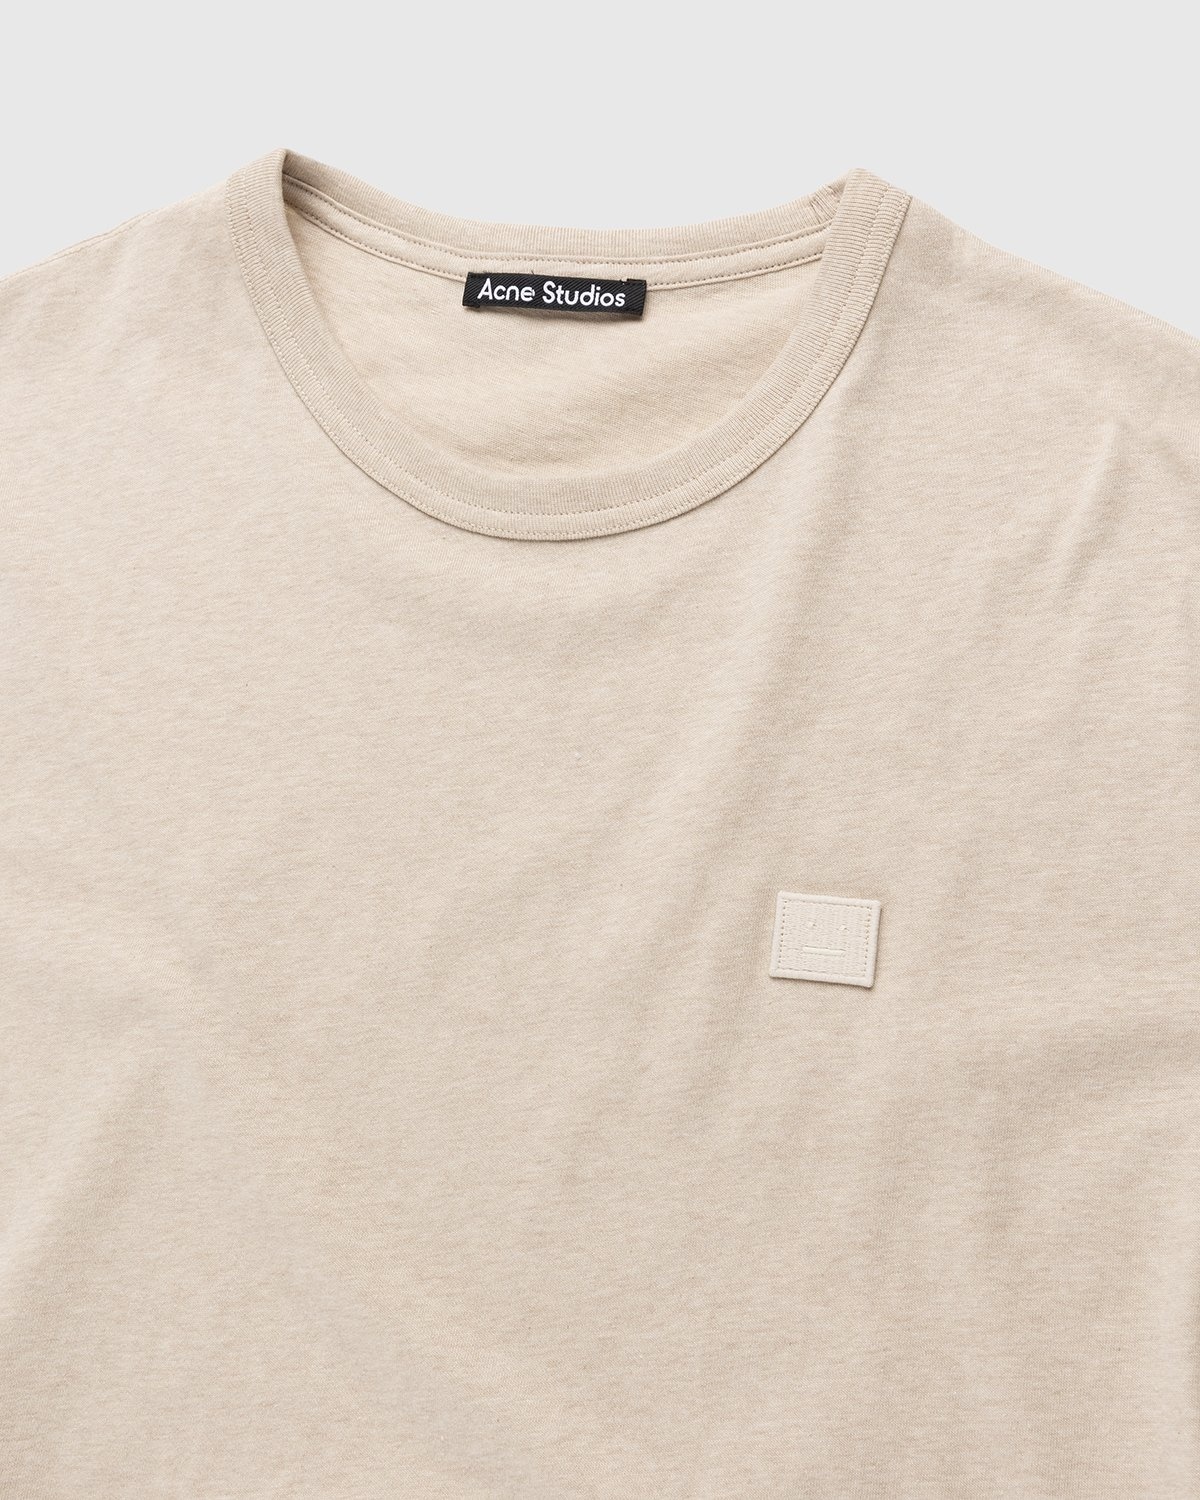 Acne Studios – Relaxed Fit T-Shirt Oatmeal Melange - T-shirts - Beige - Image 3